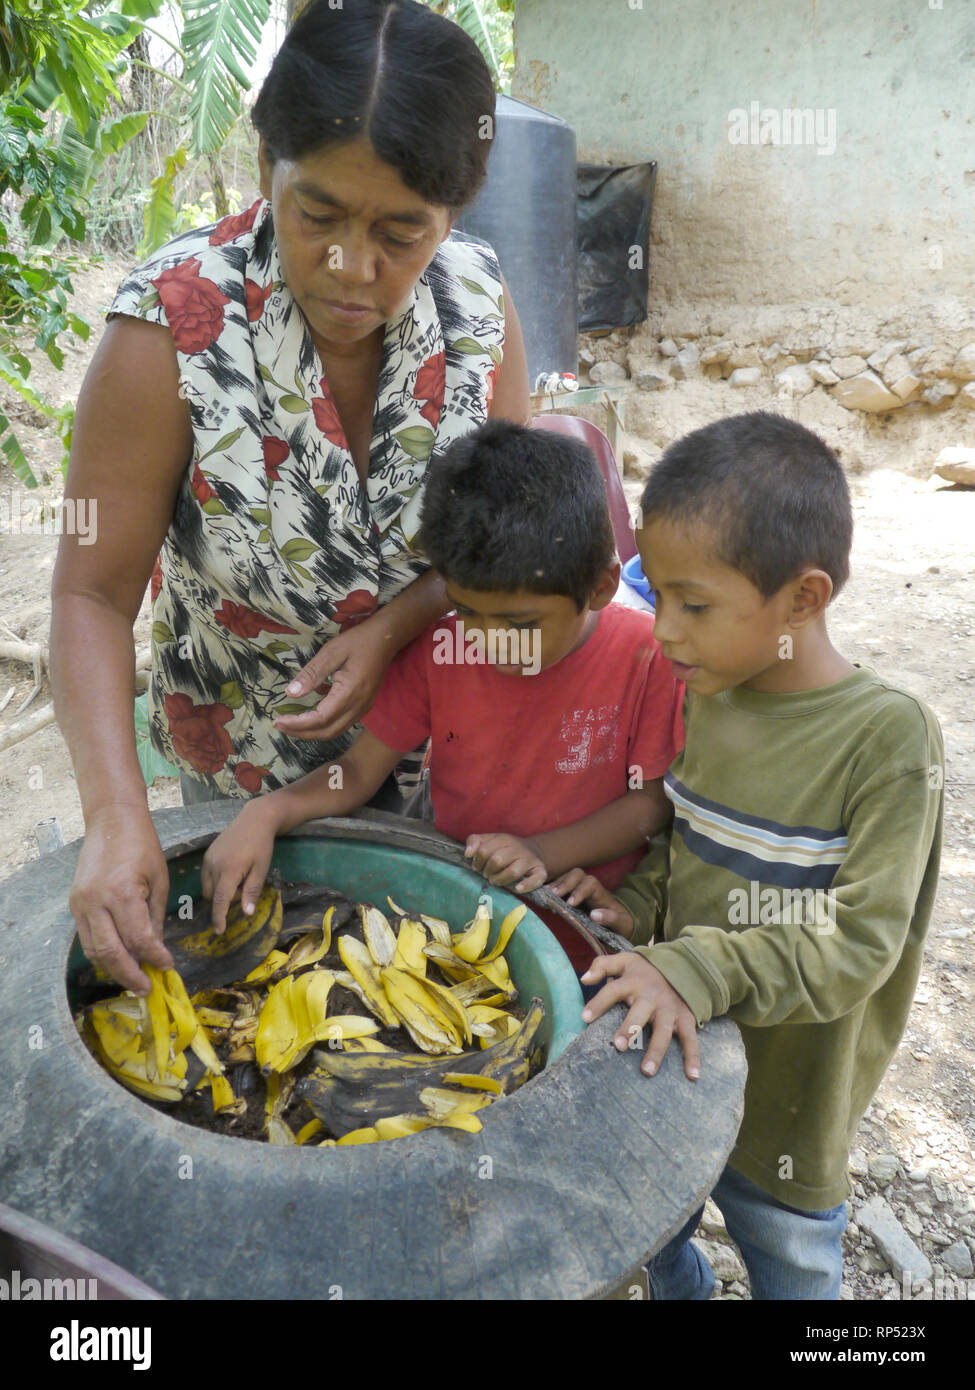 Nicaragua  FEDICAMP projects. Home of Reyna Margarita Vanegas (58) and her two sons Jose Armado Prado (4) and Junerling Prado (3). Worm culture for making compost. Reyna and the boys examine the pot in which the worms breed. Stock Photo